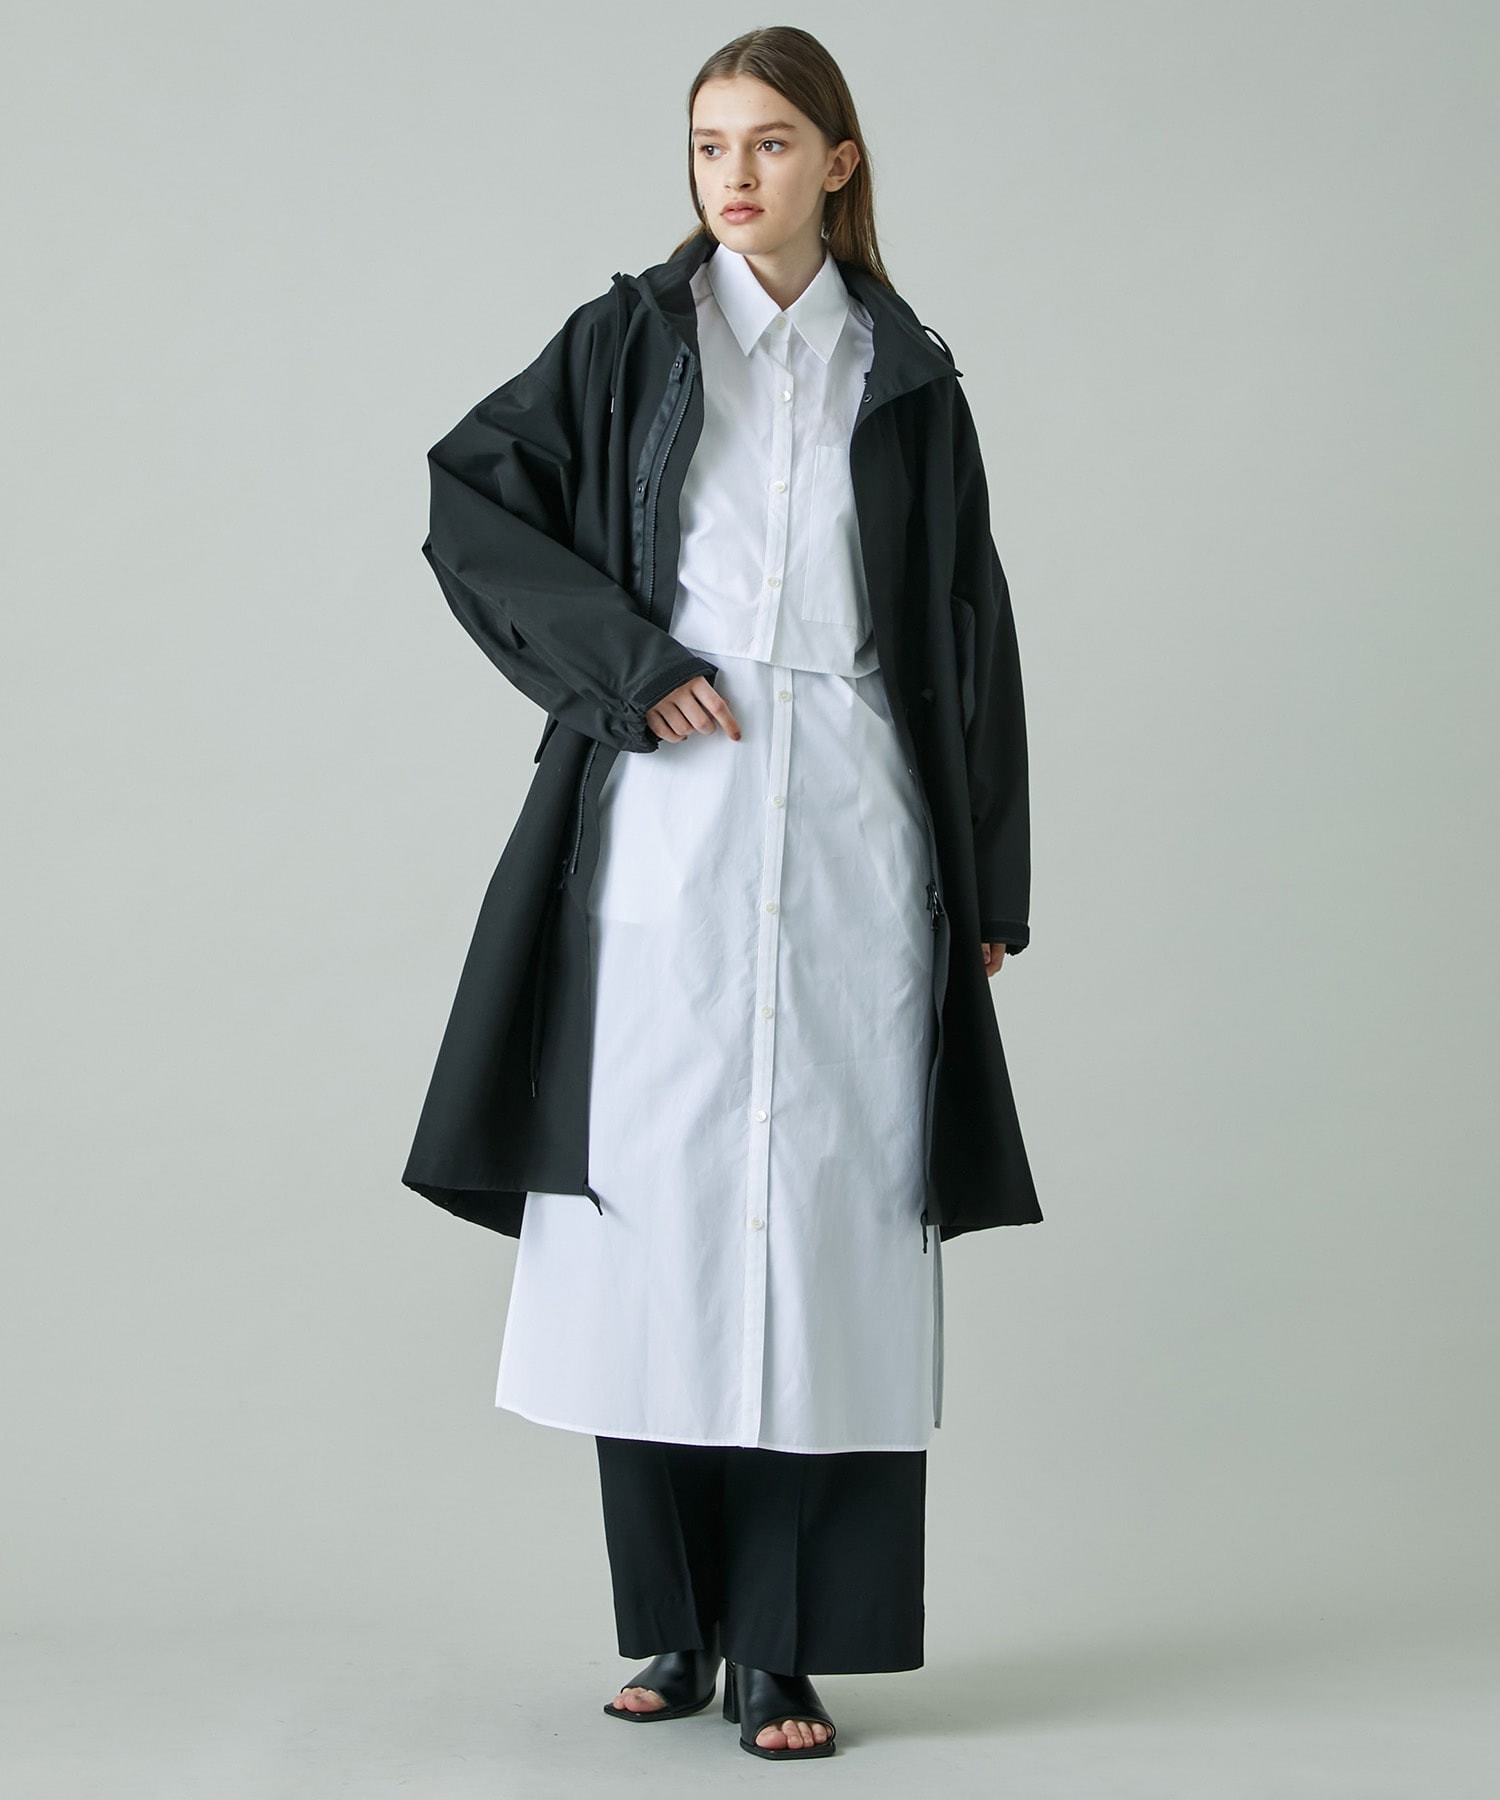 08sircus High count weather mods coat | www.innoveering.net